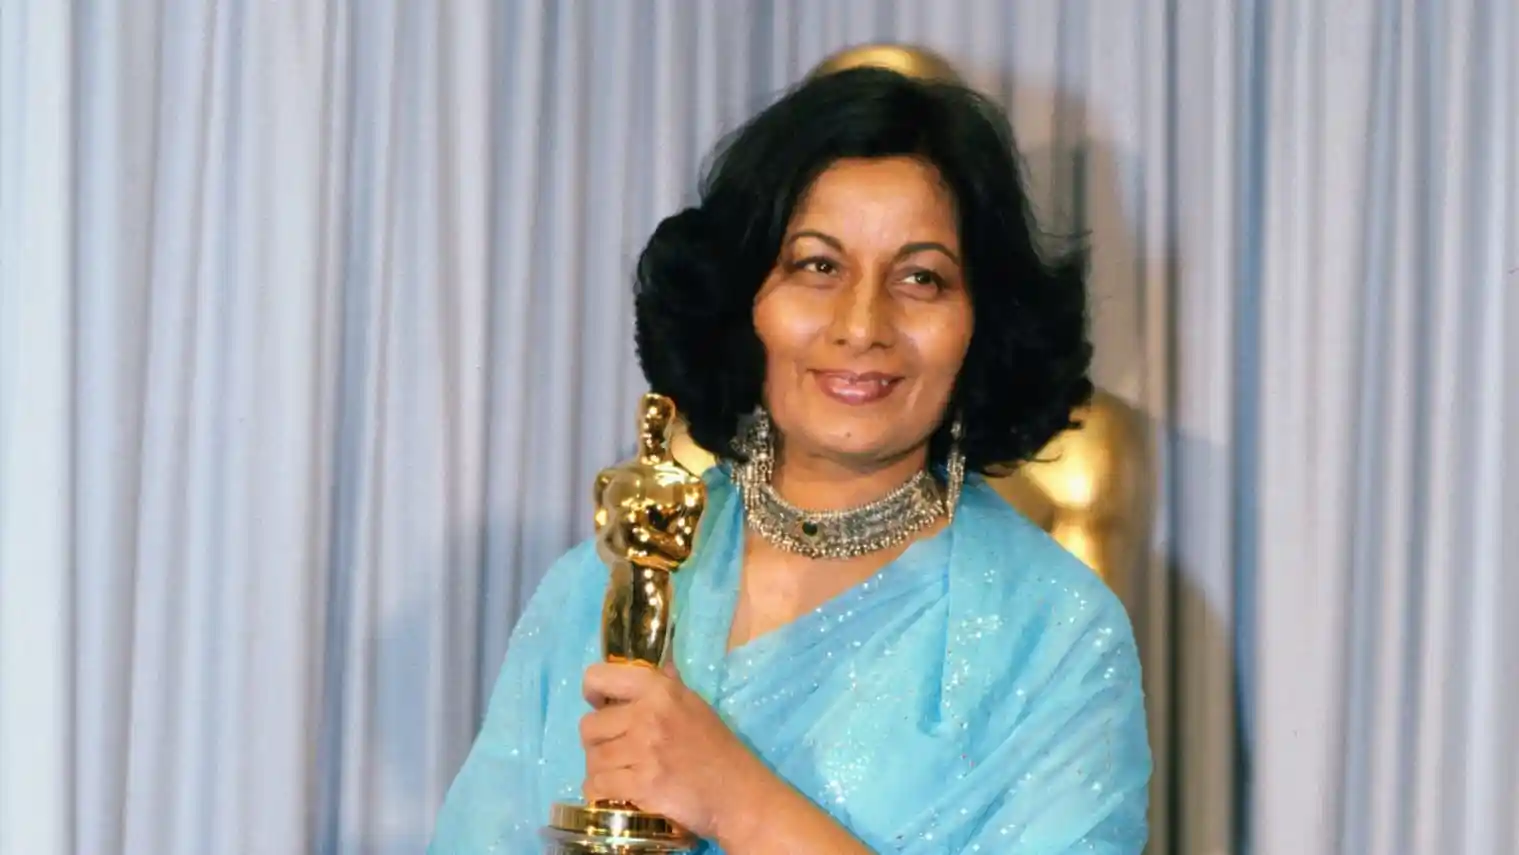 The golden lady with the golden award; Source: CNN